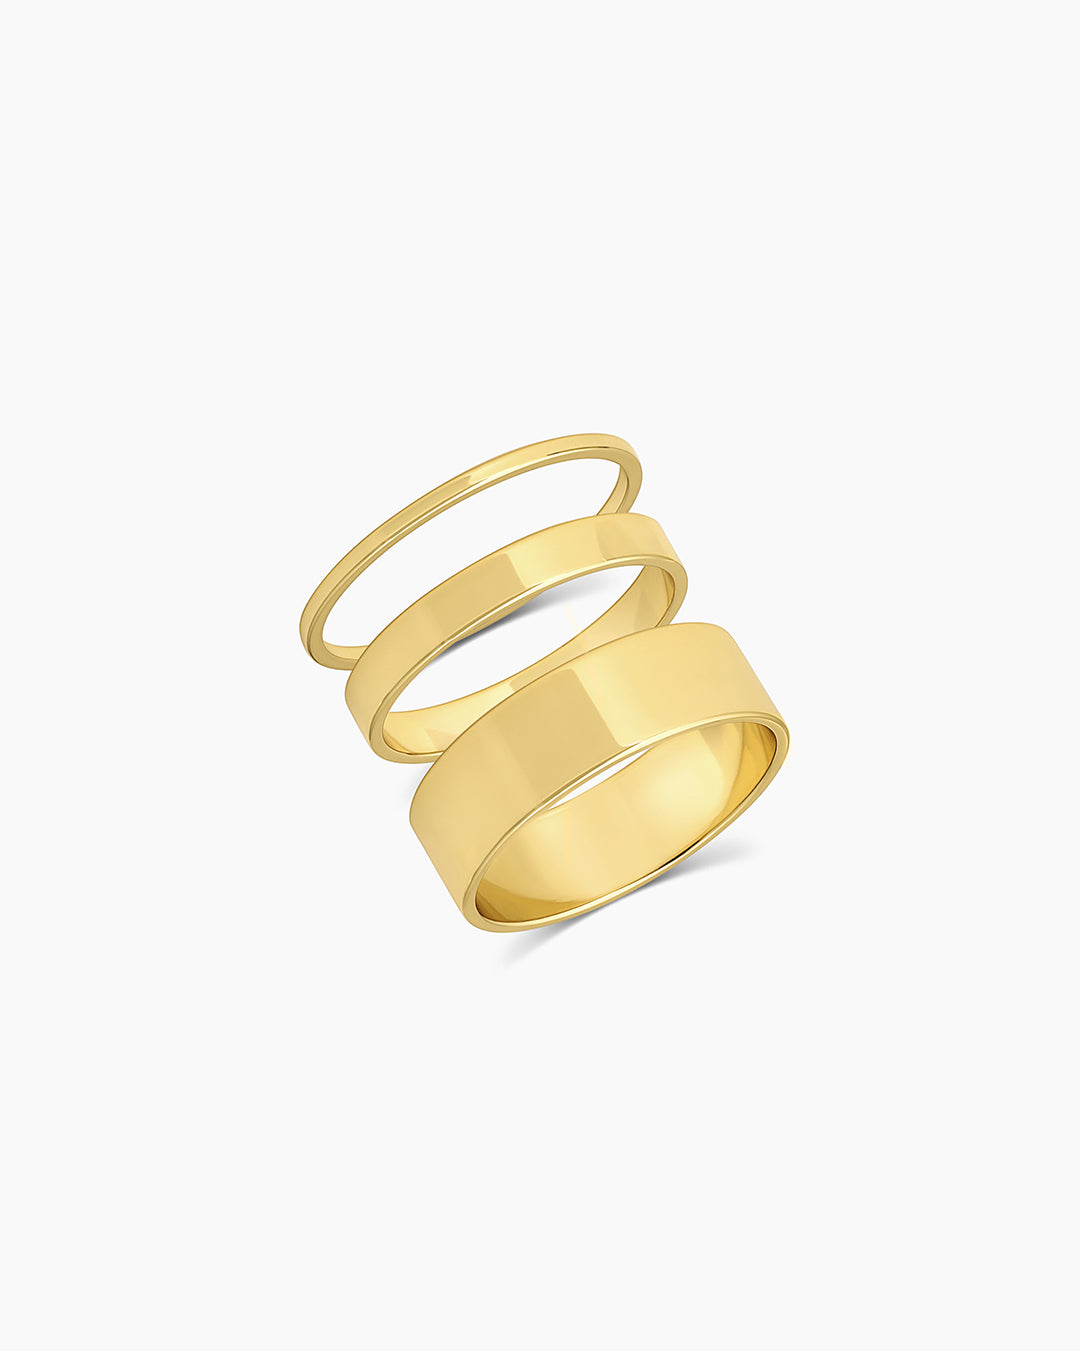 Rings for Women: Gold Rings, Stackable Sets, & More